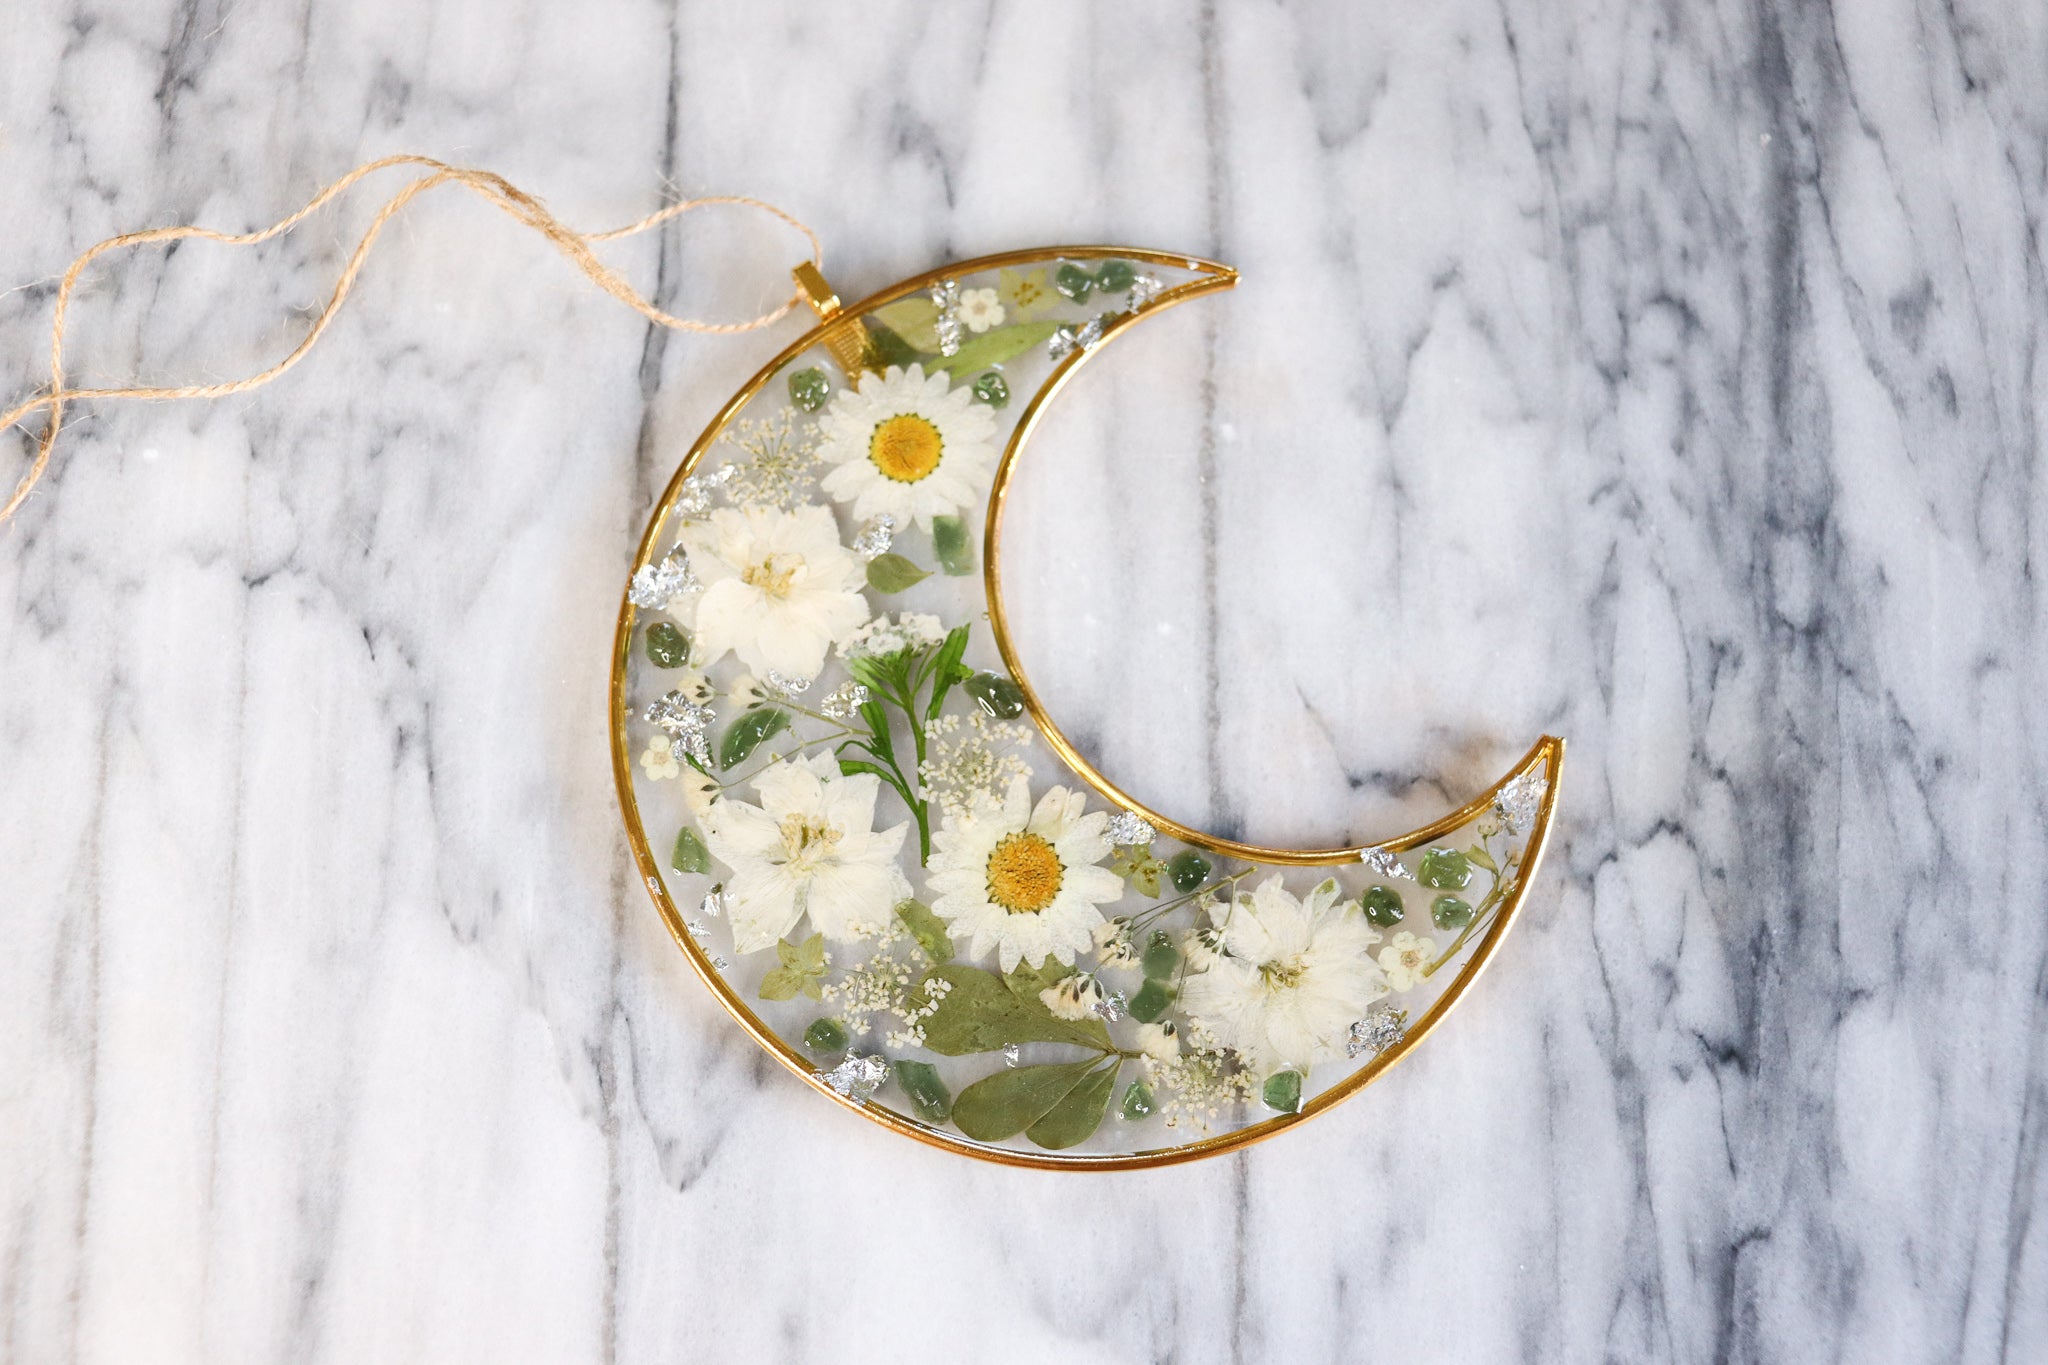 White Fields - Crystal, Resin and Flower Crescent Moon Wall Hanging